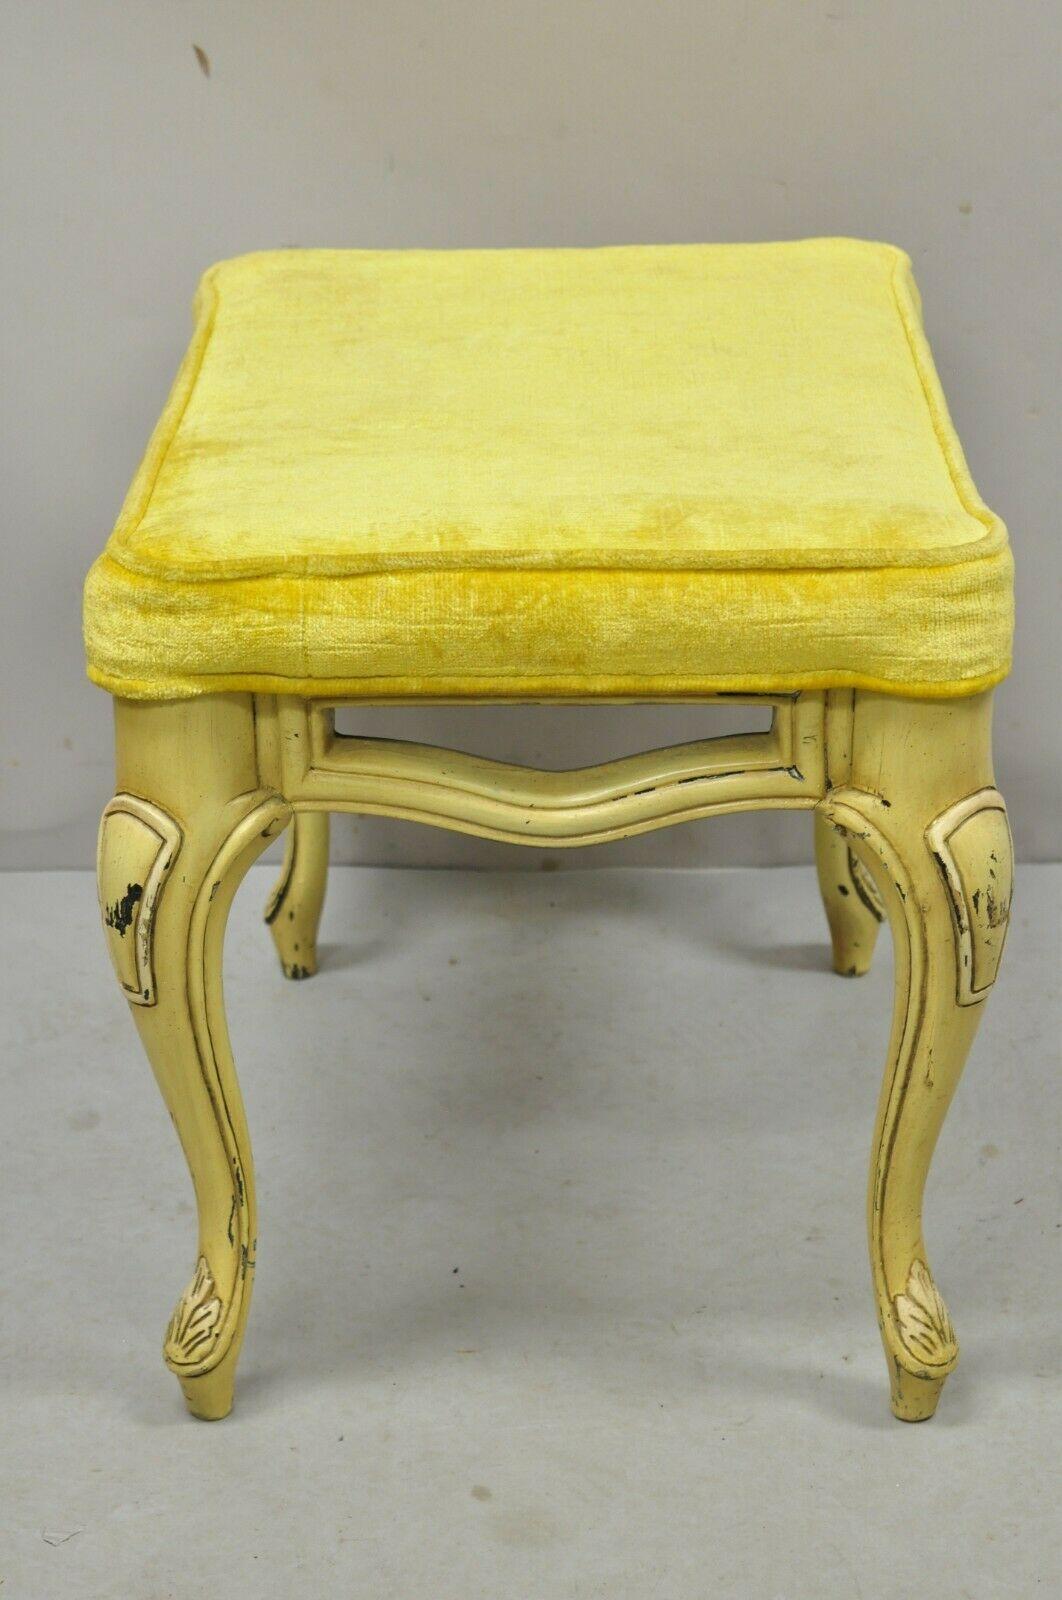 Vintage French Provincial Yellow Painted Cabriole Leg Vanity Bench Seat For Sale 3